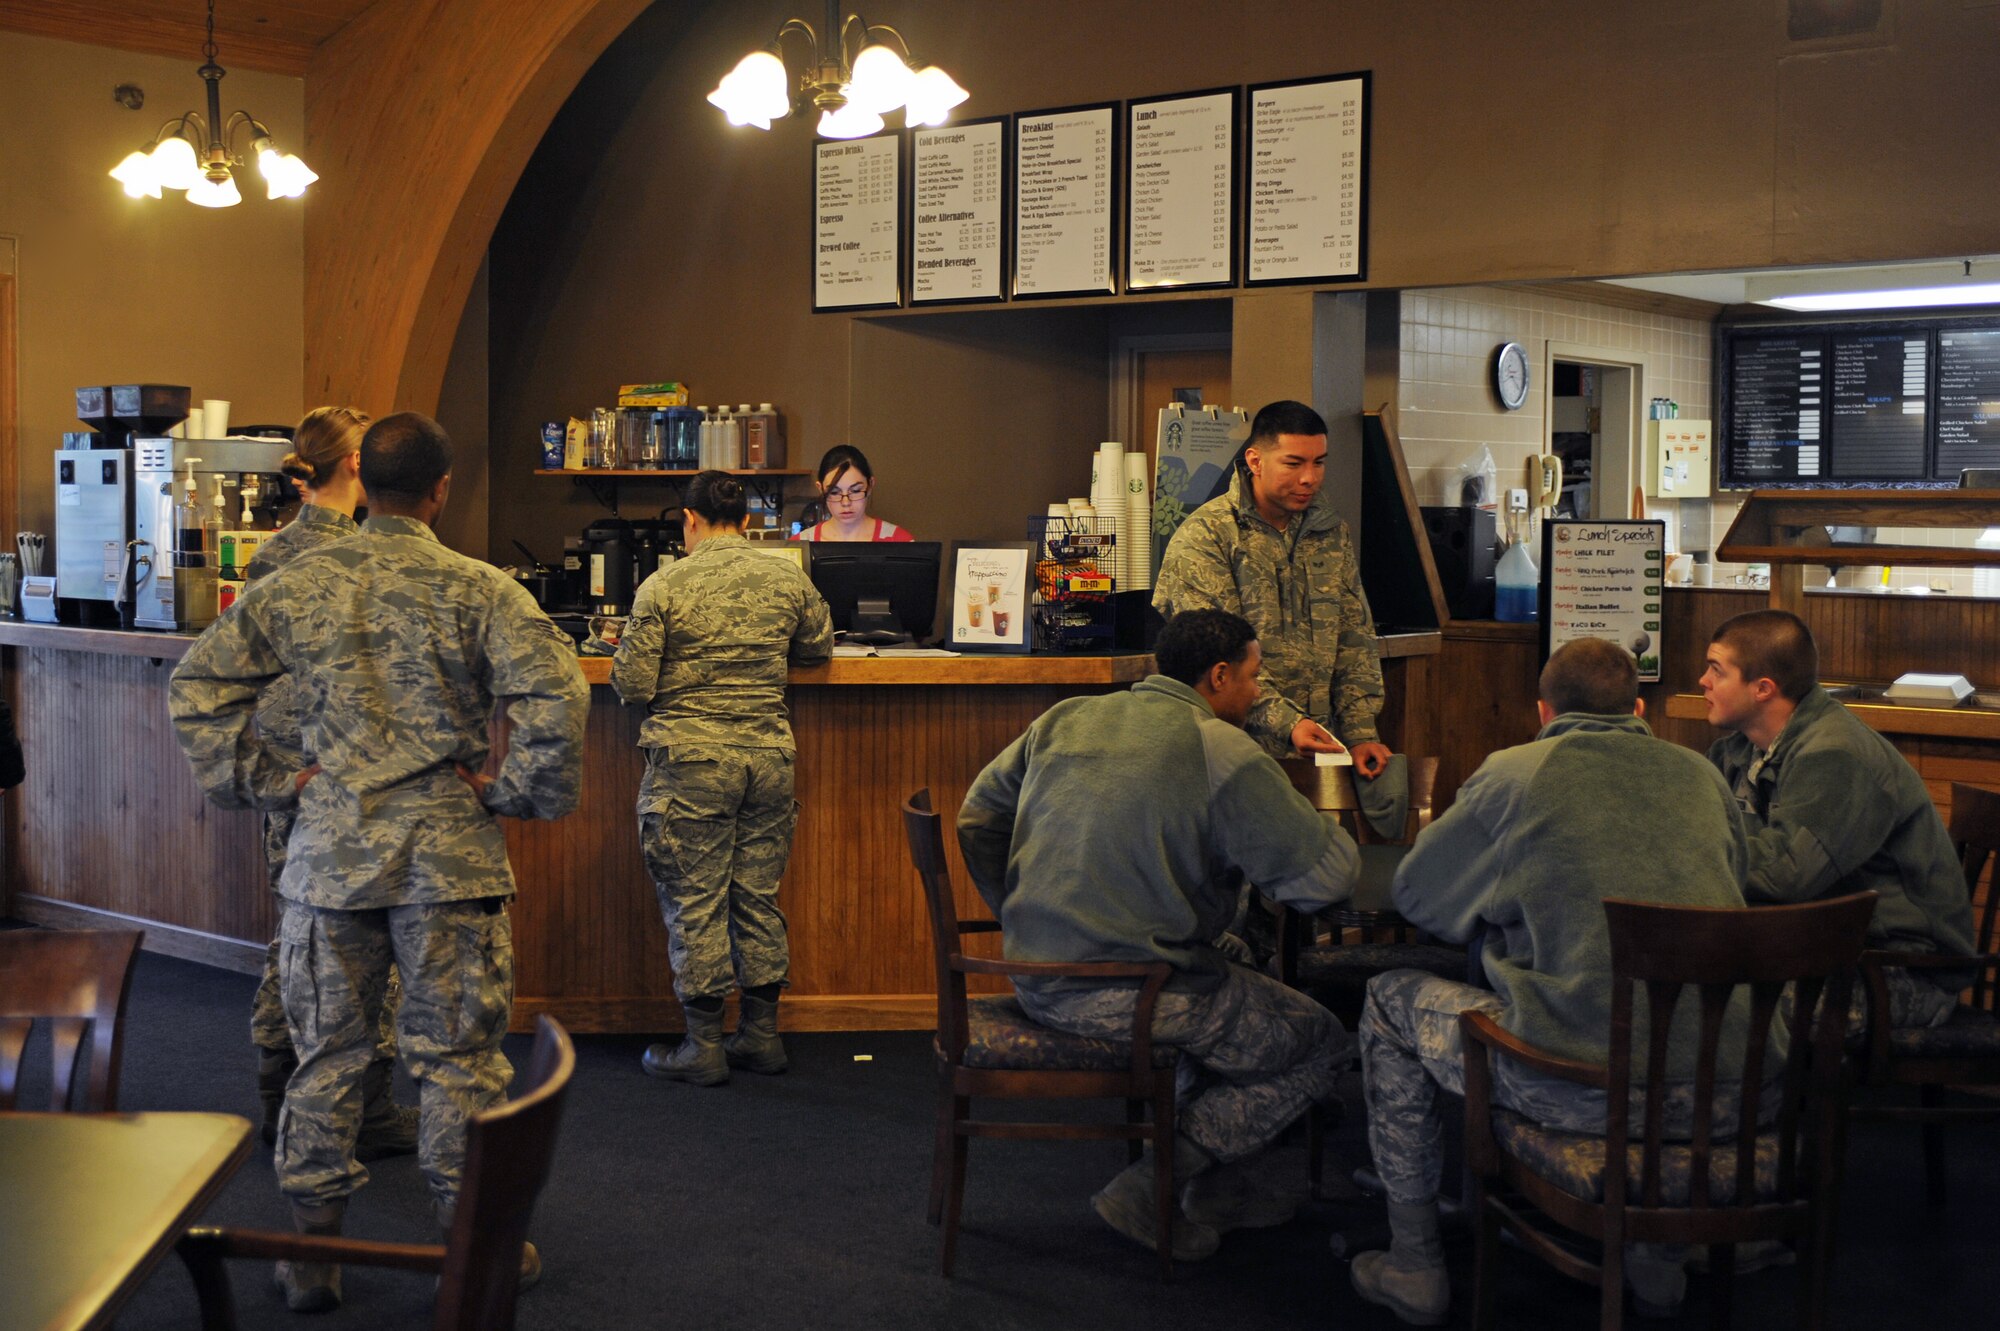 U.S. Air Force Airmen assigned to the 4th Fighter Wing sip coffee and converse at the newly opened Starbucks located in the Three Eagles Café on Seymour Johnson Air Force Base, N.C., Mar. 1, 2013. Starbucks is open Monday through Friday from 6:30 a.m. to4:30 p.m., and Saturday and Sunday from 6:30 a.m. to 2 p.m. (U.S. Air Force photo/Airman 1st Class John Nieves Camacho/Released)